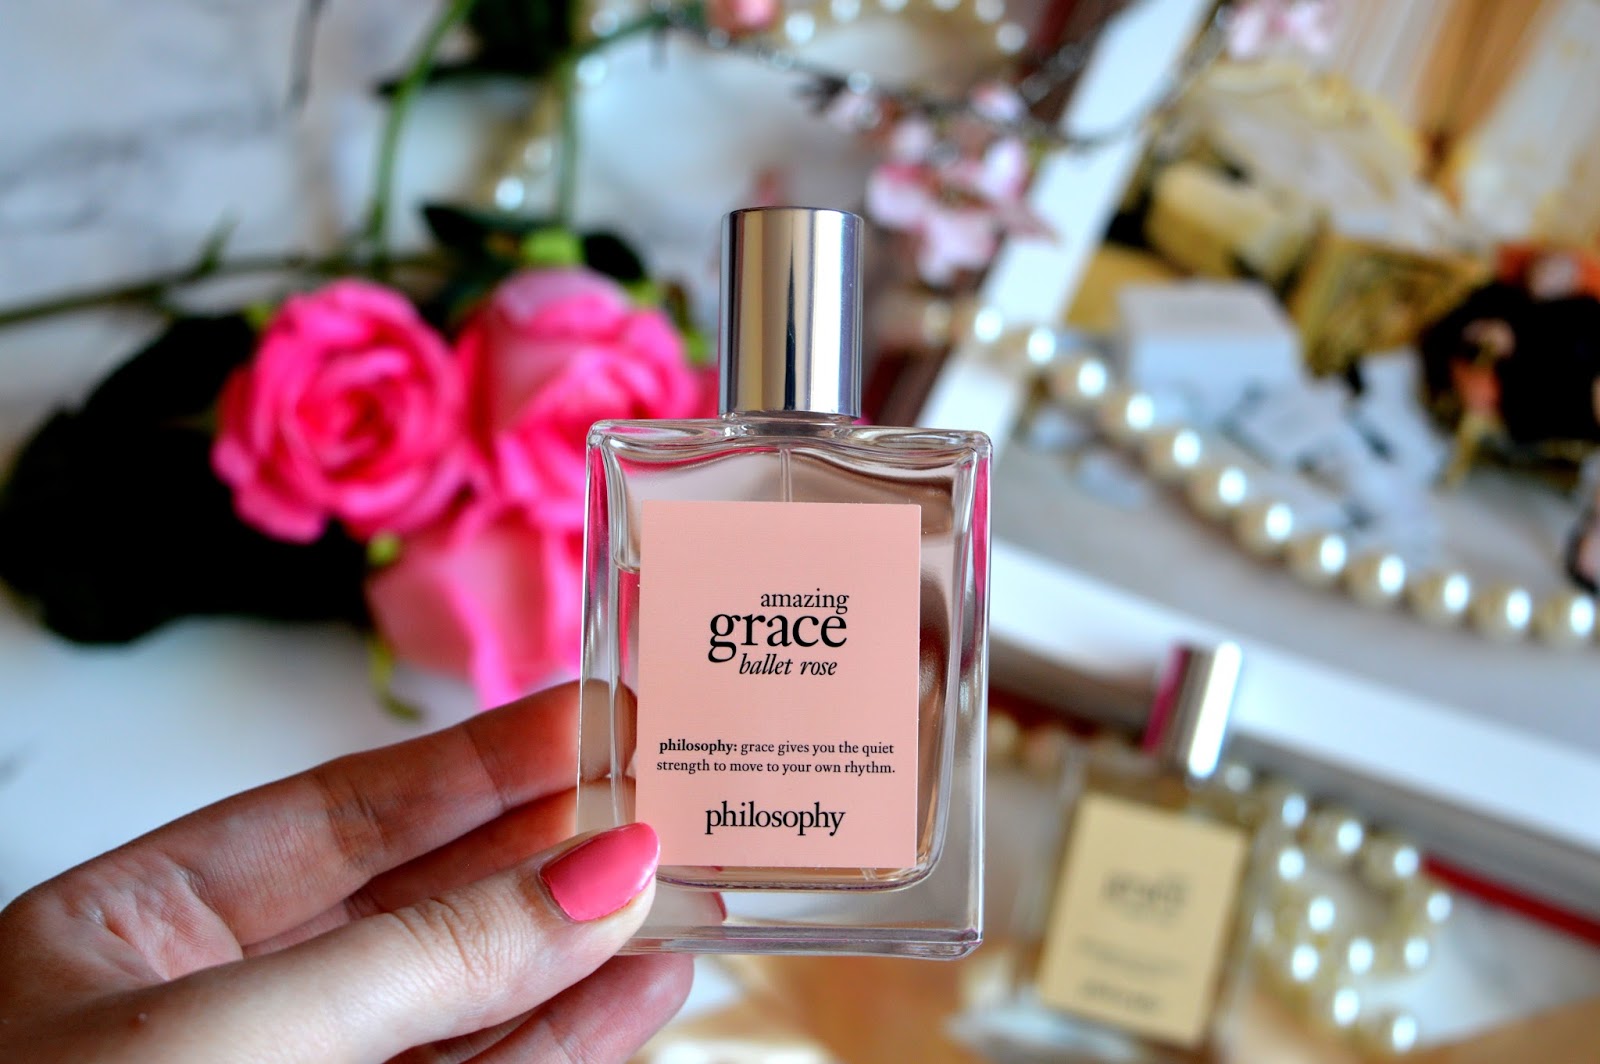 Philosophy Pure Grace Nude Rose and Amazing Grace Ballet Rose